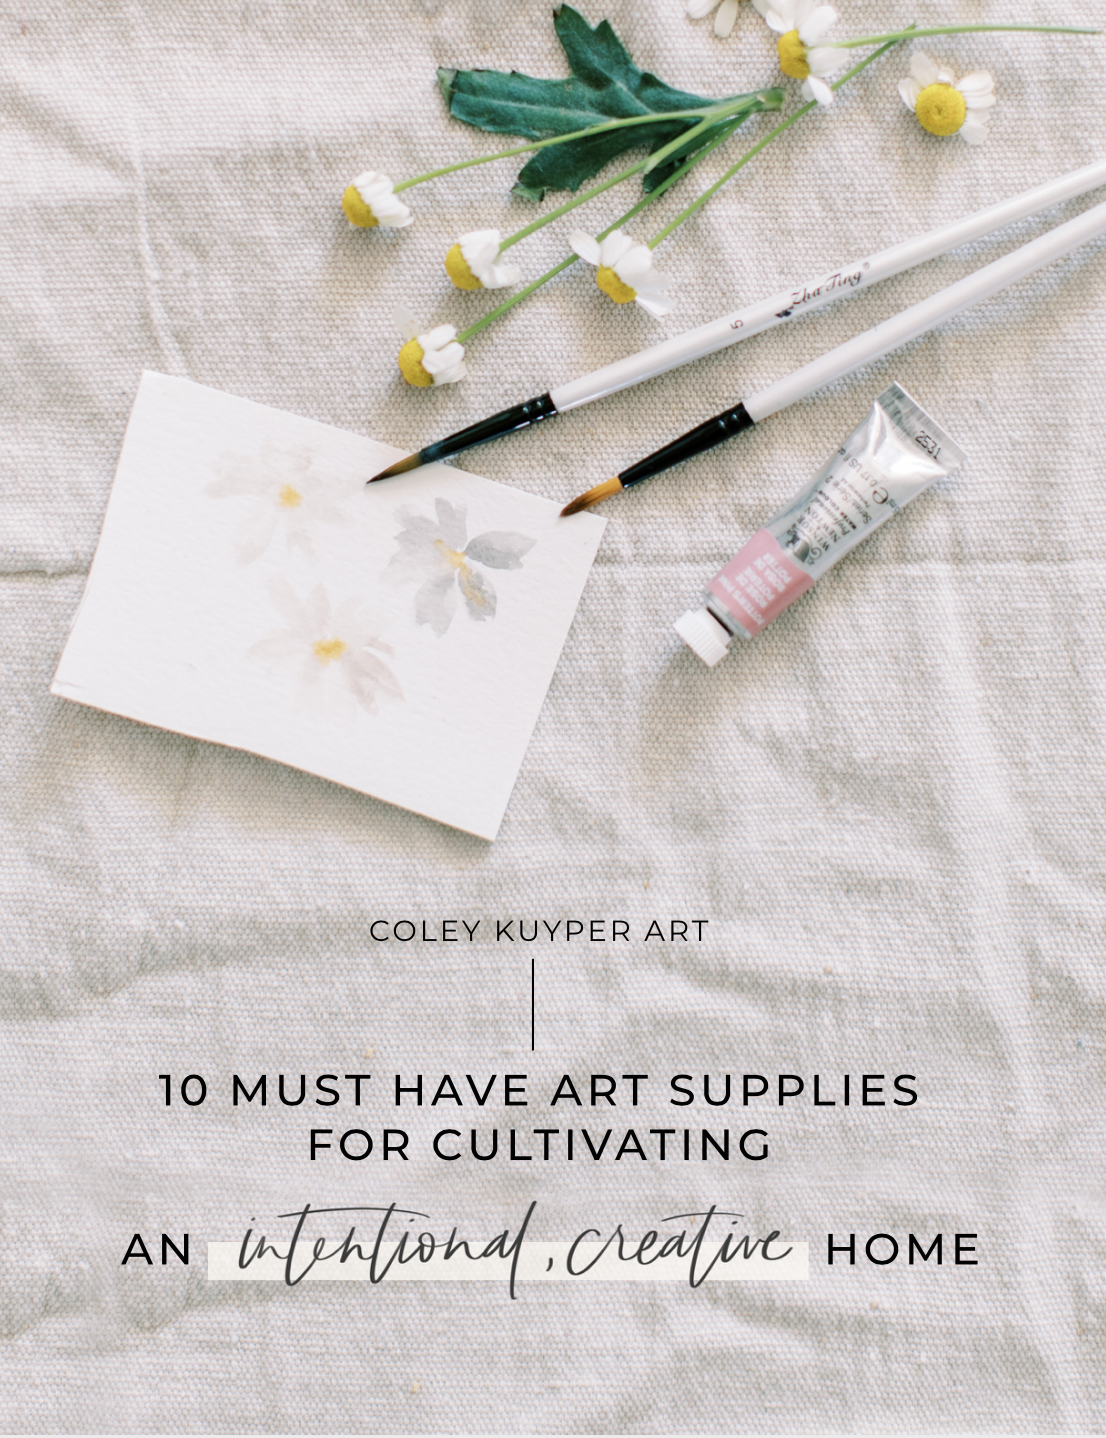 What art supplies would you recommend I buy for my kids? – Art For